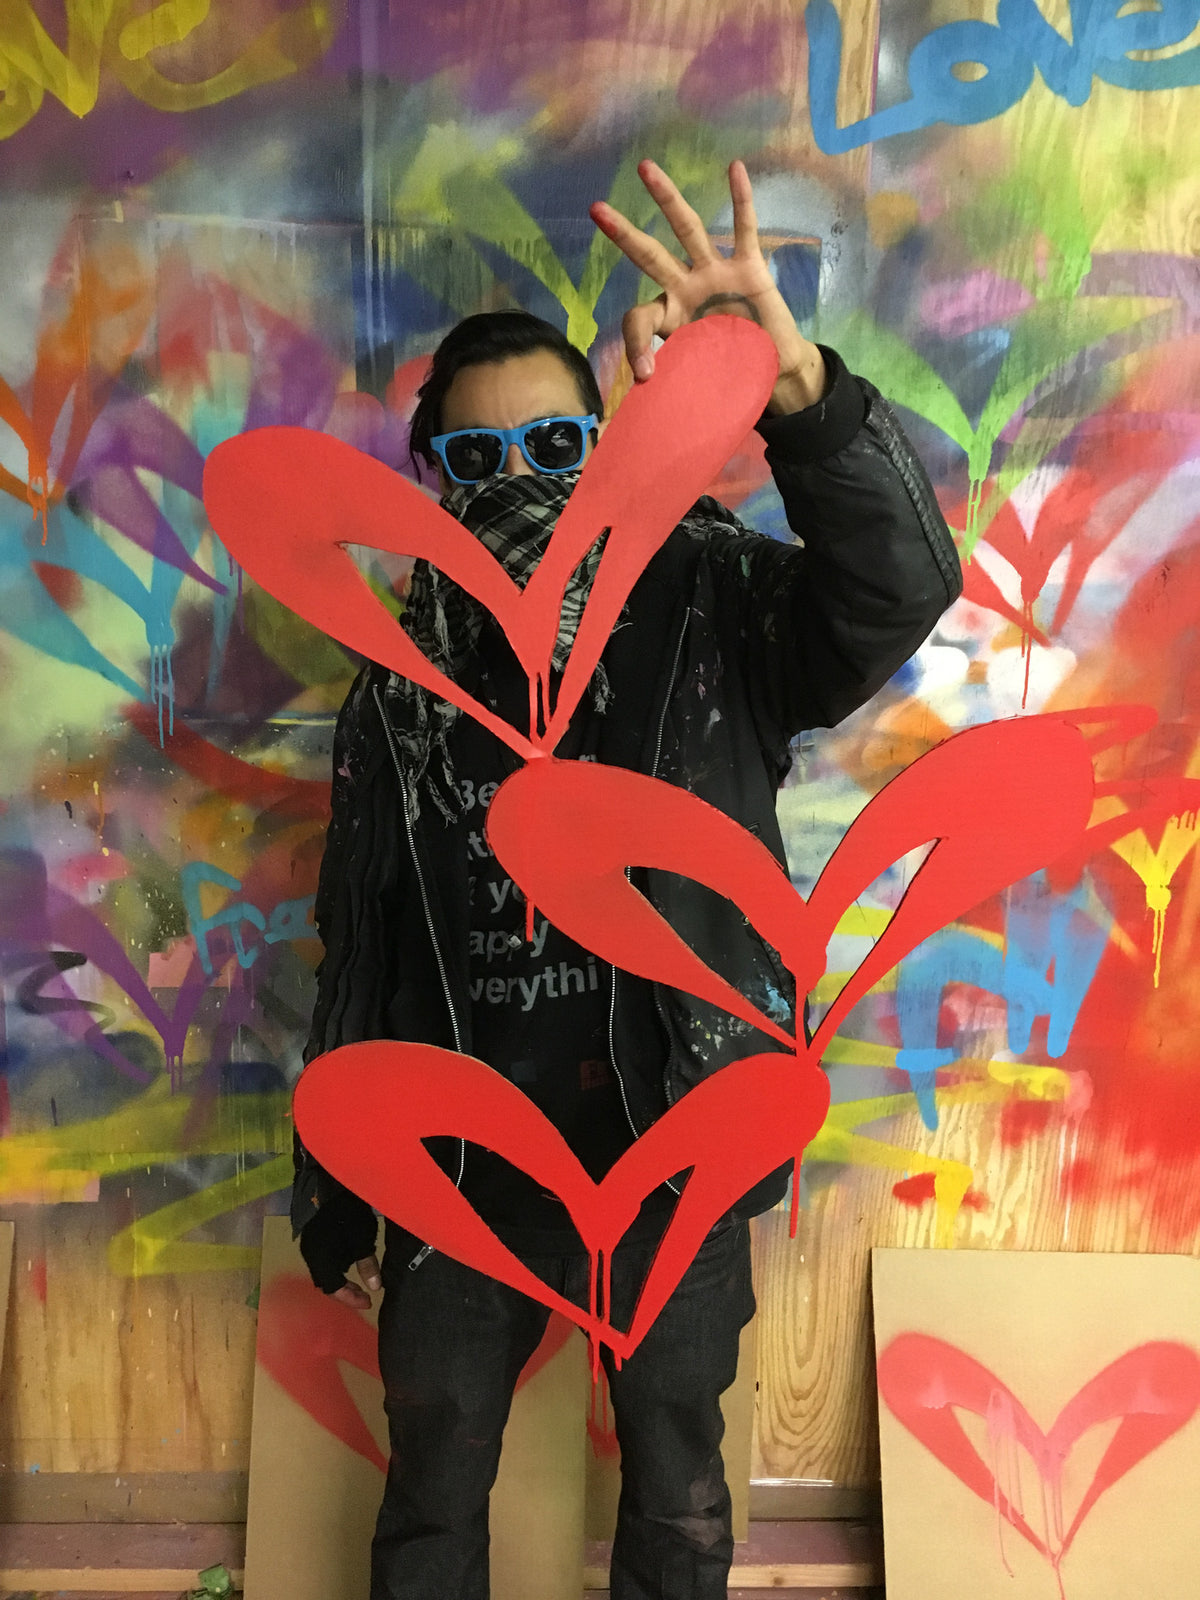 Free Humanity &quot;Red Hearts - Triple&quot; - Hand-Painted Cardboard Cut Out